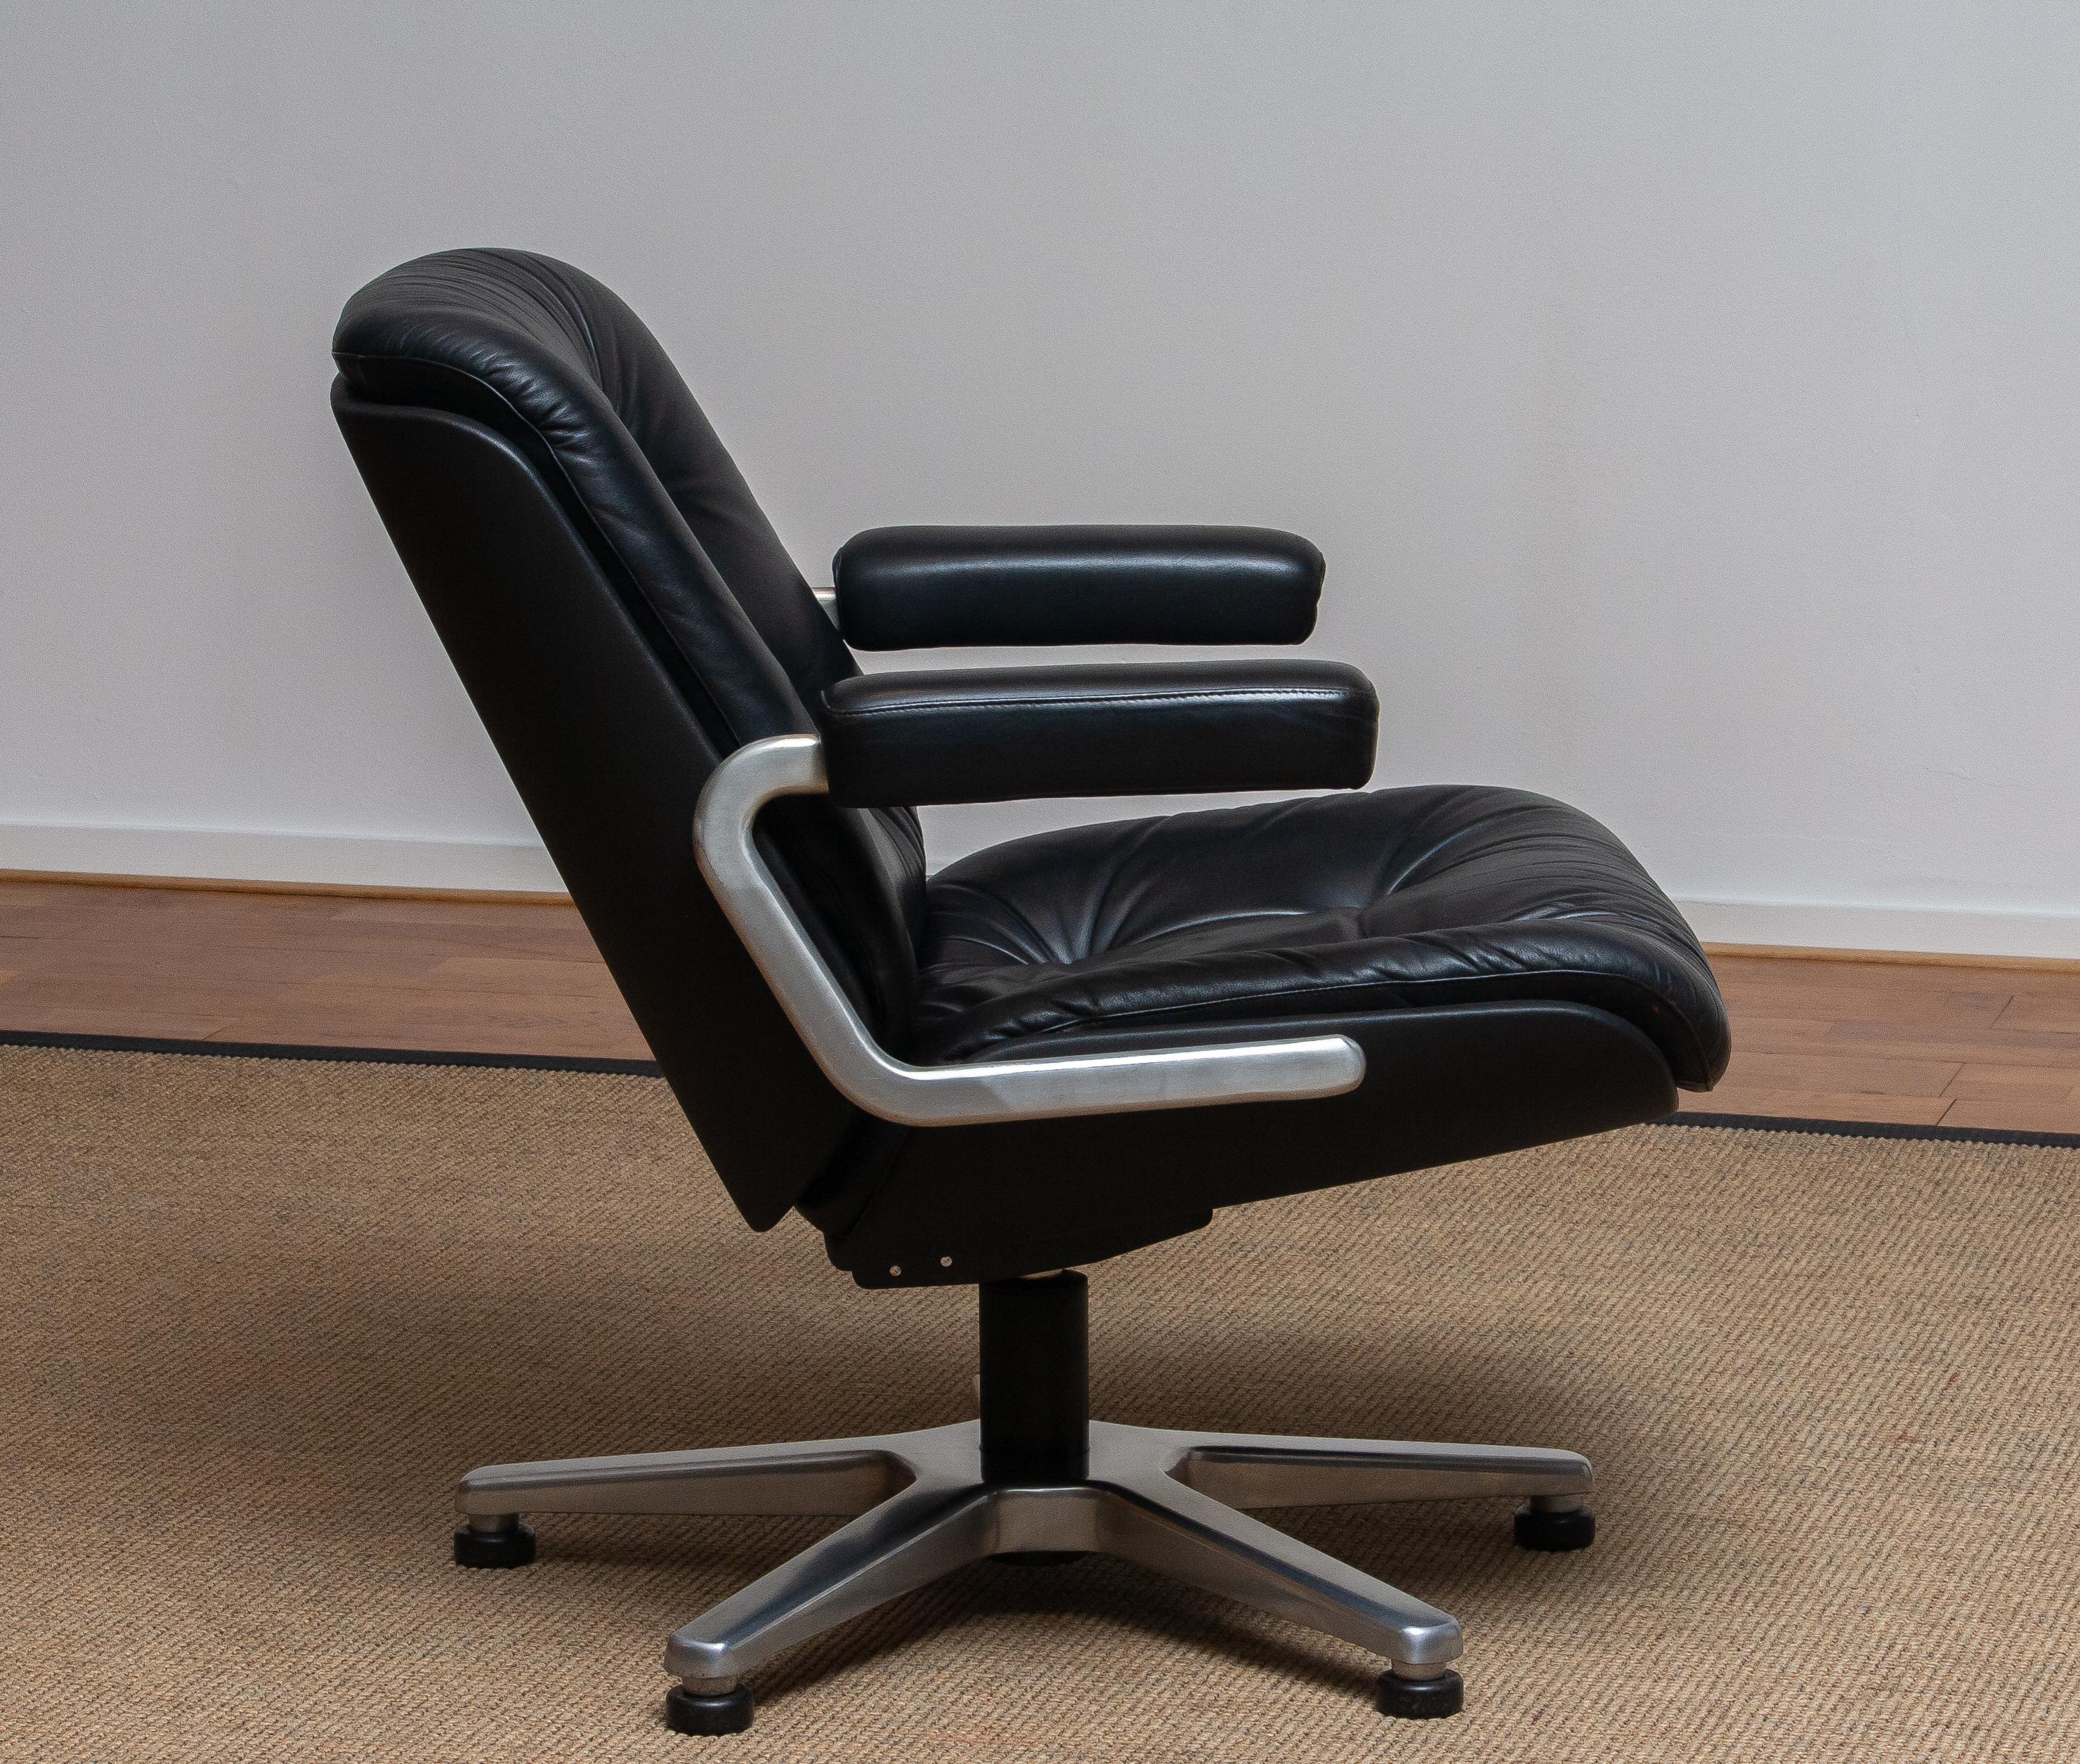 1960s, Black Leather Swivel Chair by Martin Stoll for Giroflex Stoll Mdl, 7065 1